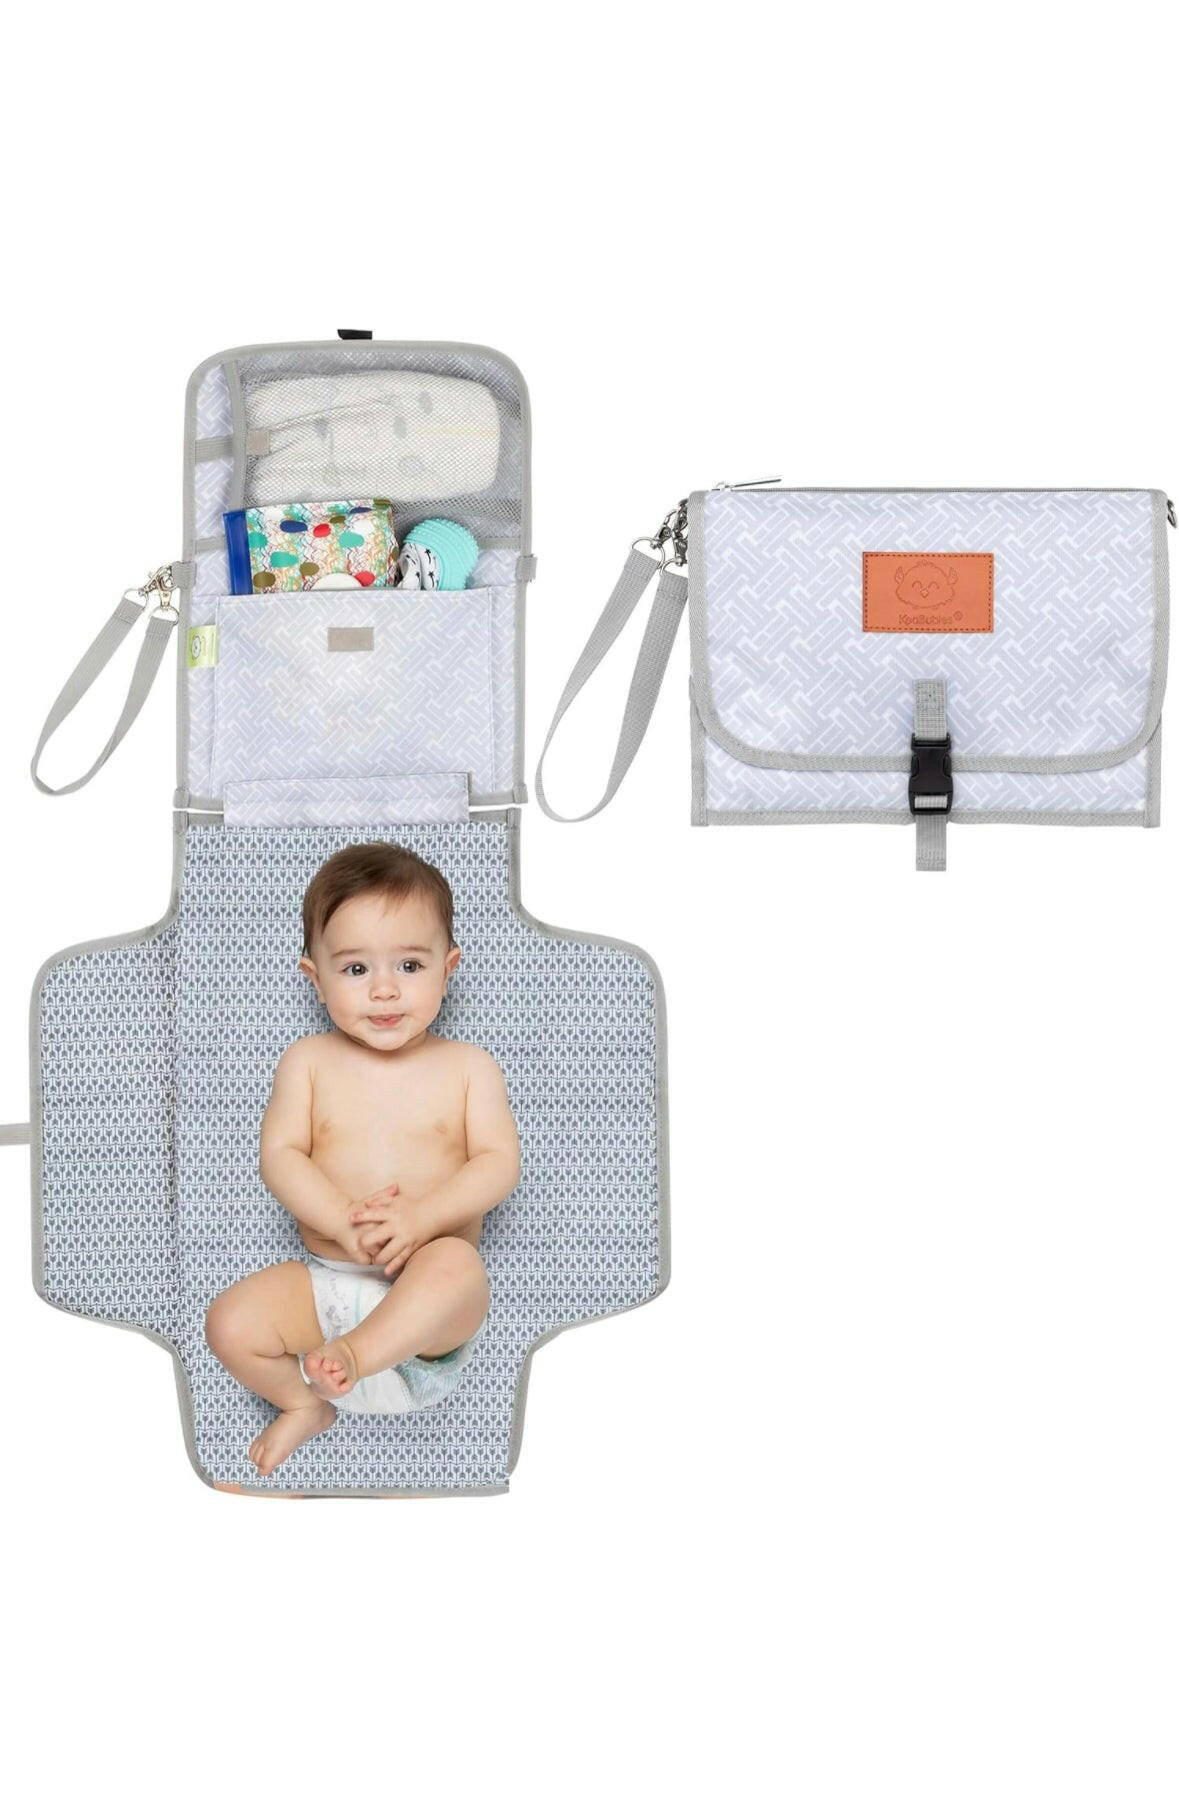 Portable Diaper Changing Pad - Waterproof Travel Changing Mat for Baby.